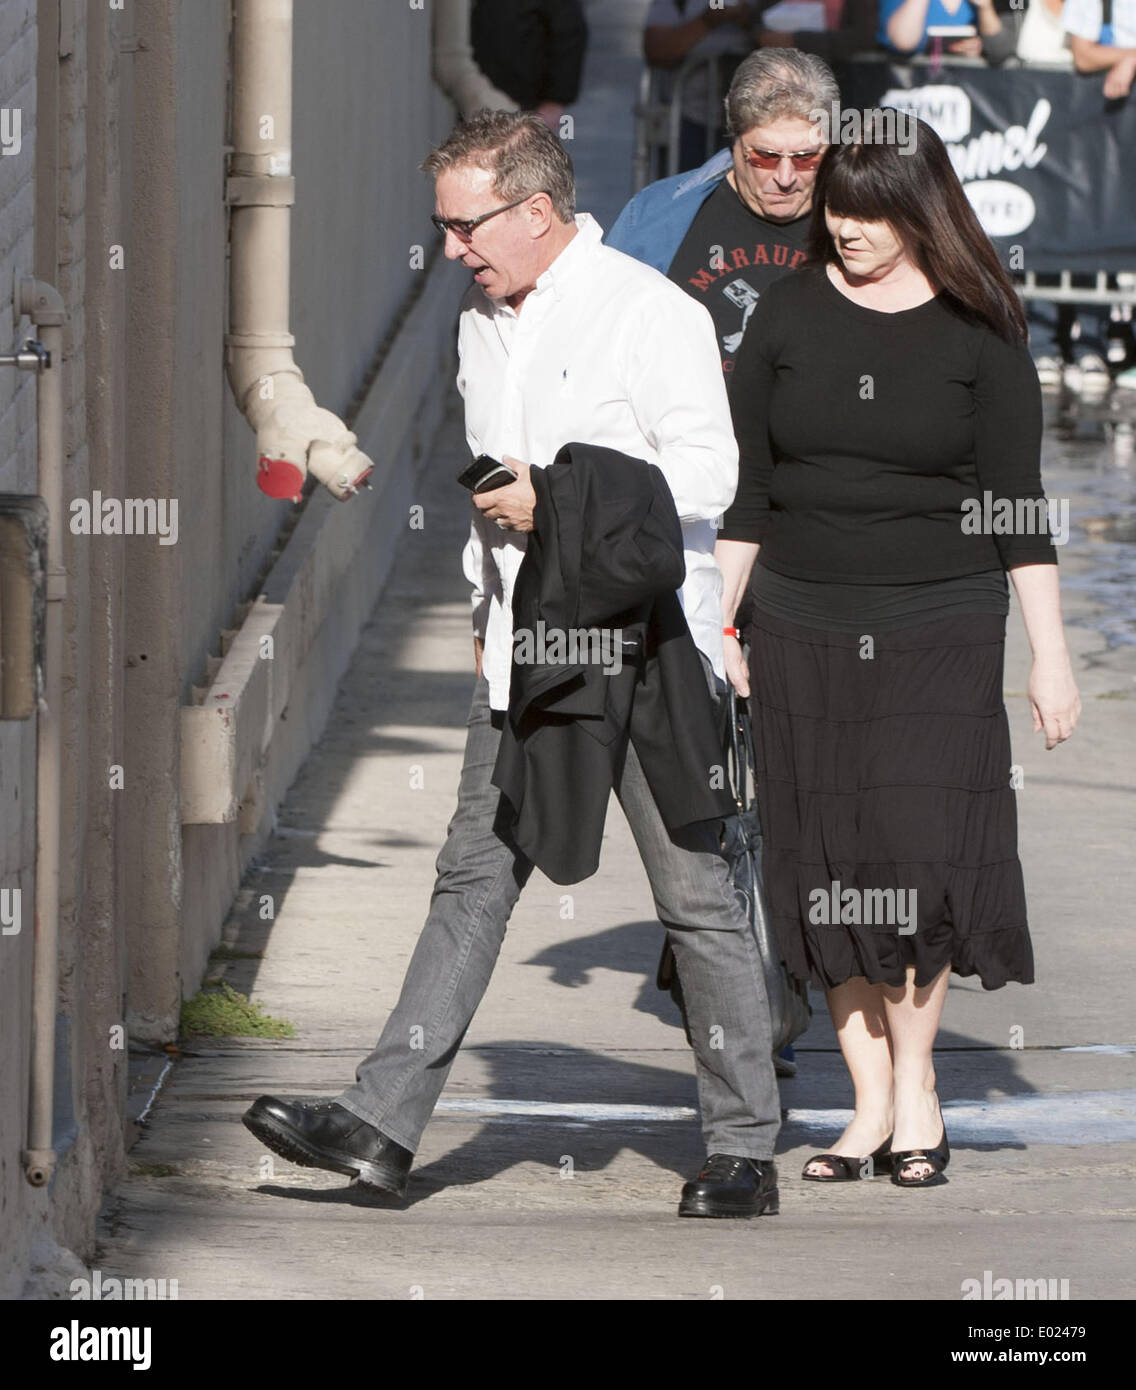 Hollywood, California, USA. 22nd Apr, 2013. TIM ALLEN, the voice of Disney's Buzz Lightyear from the successful Toy Story movie series, arrives for his appearance on Jimmy Kimmel Live at the El Capitan Theatre in Hollywood on Wednesday April 23, 2014. © David Bro/ZUMAPRESS.com/Alamy Live News Stock Photo